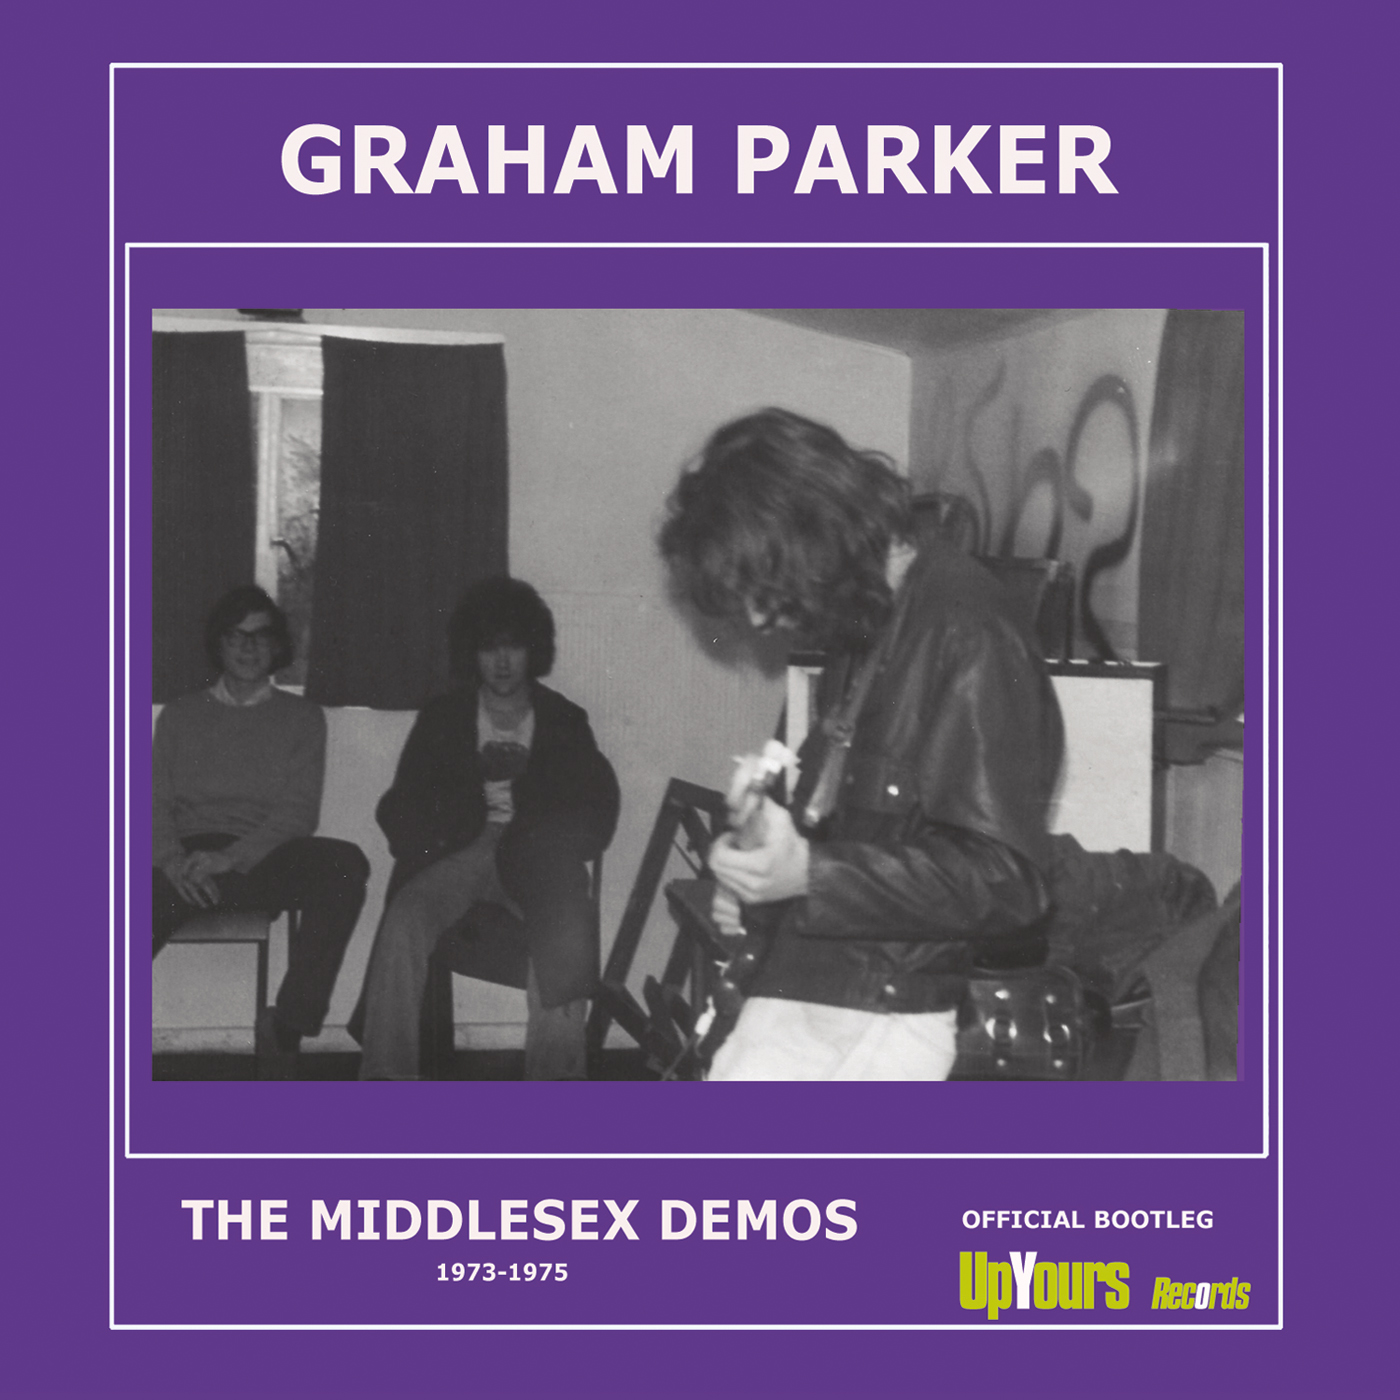 The Middlesex Demos